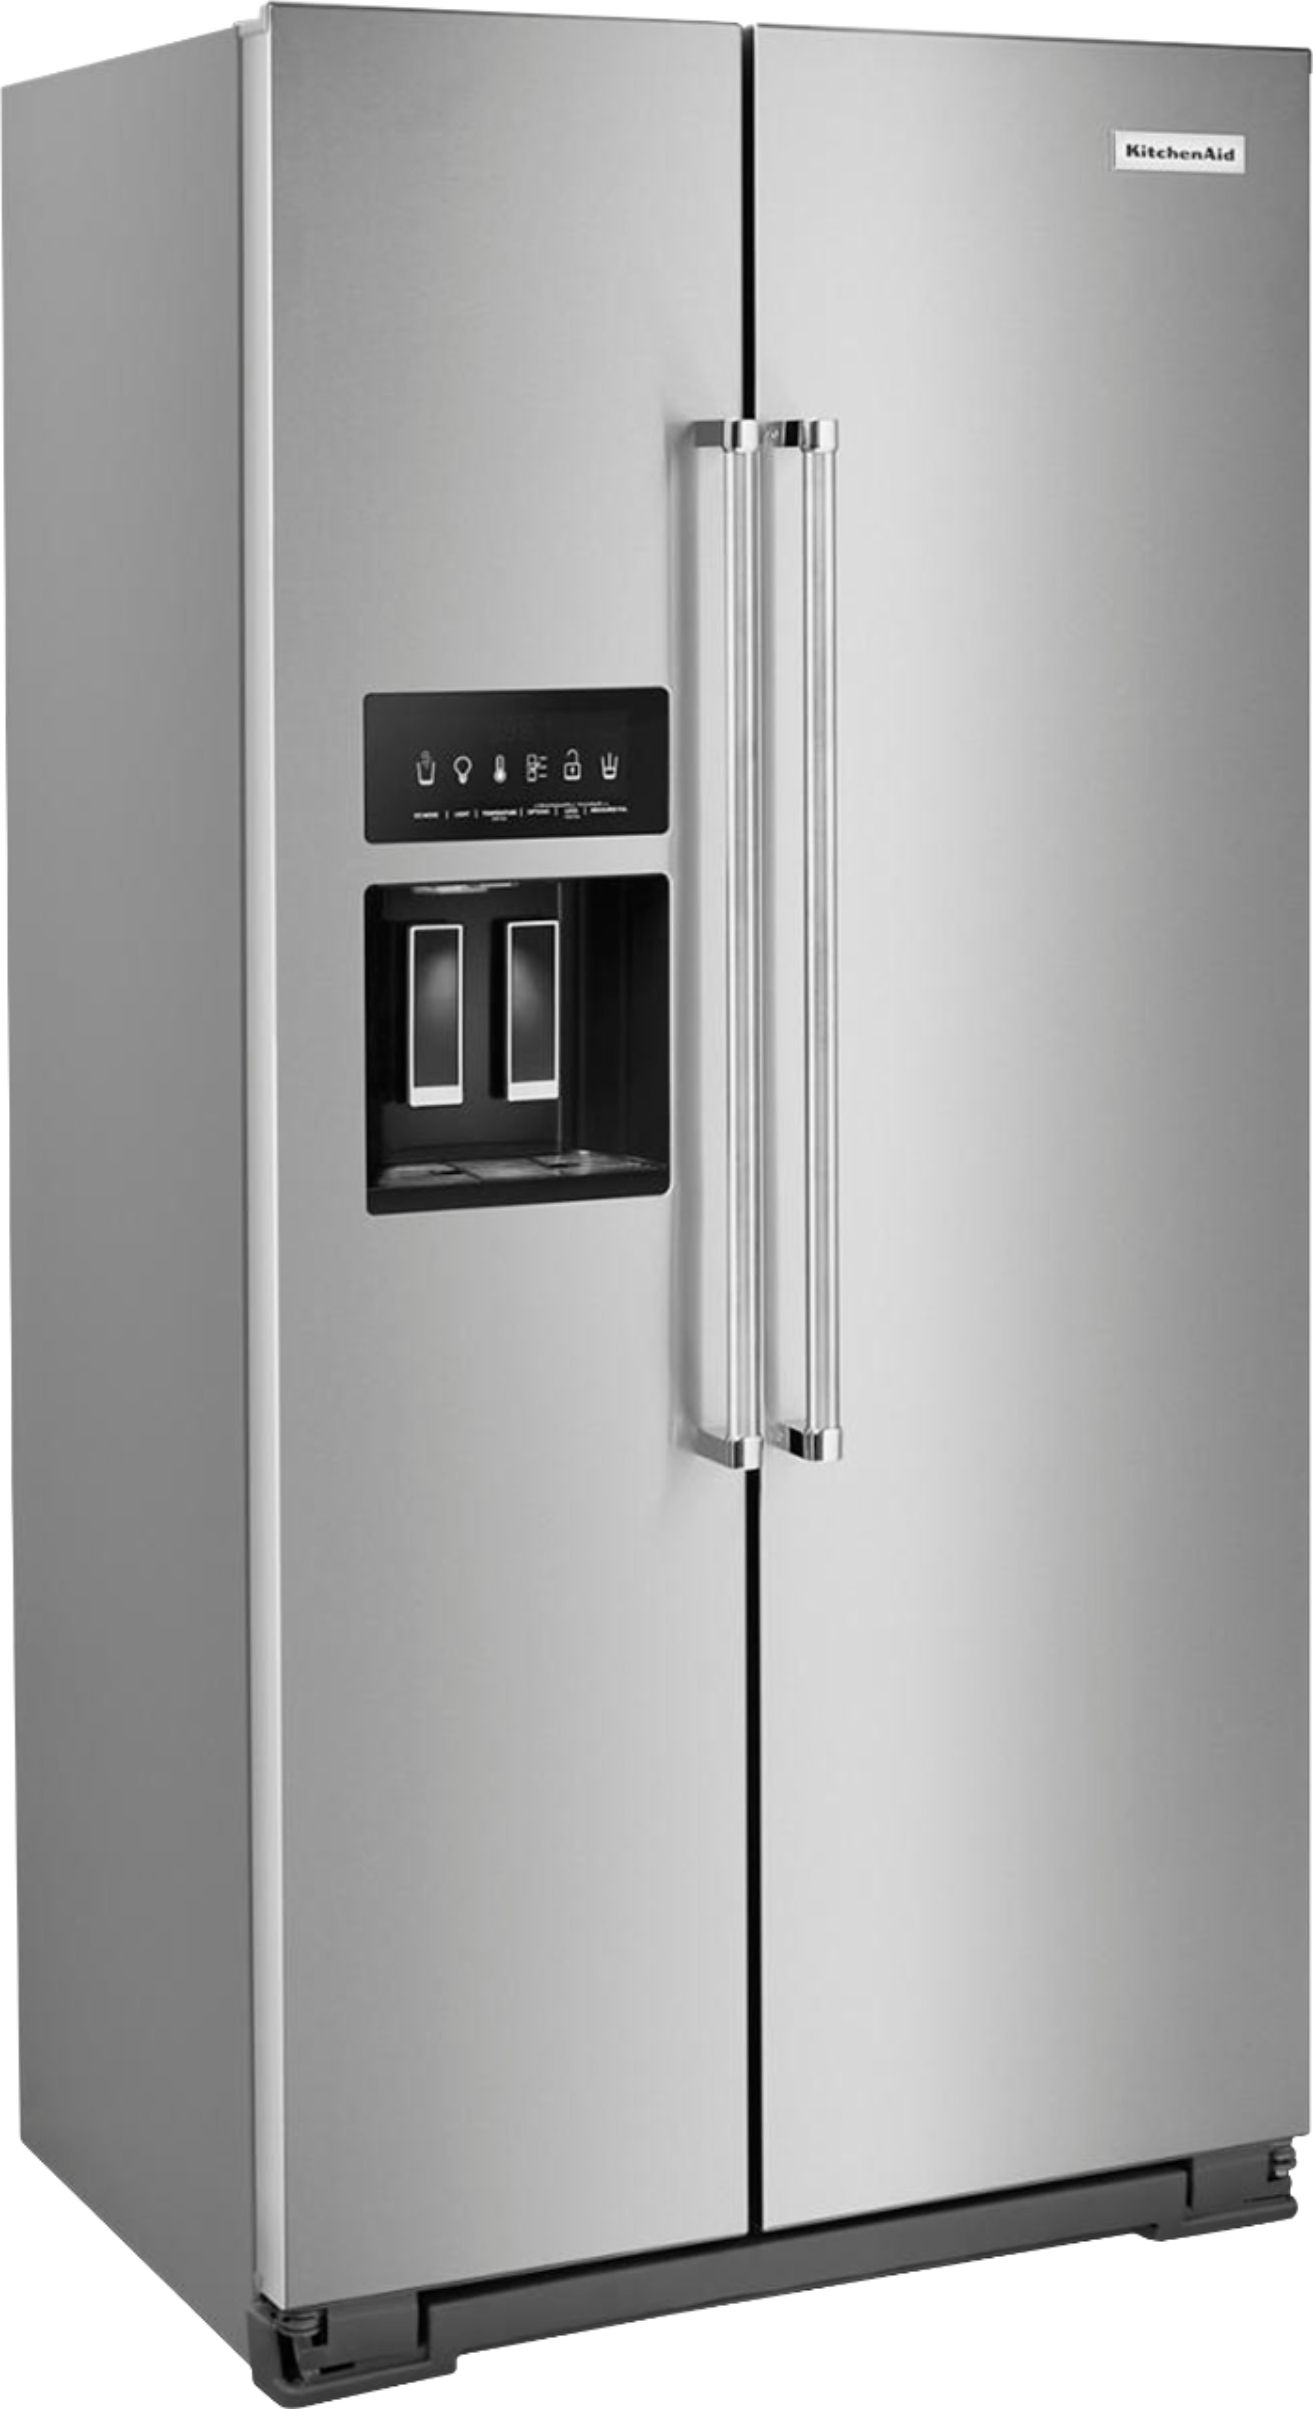 Angle View: KitchenAid - 30 Cu. Ft. Side-by-Side Built-In Refrigerator - Custom Panel Ready